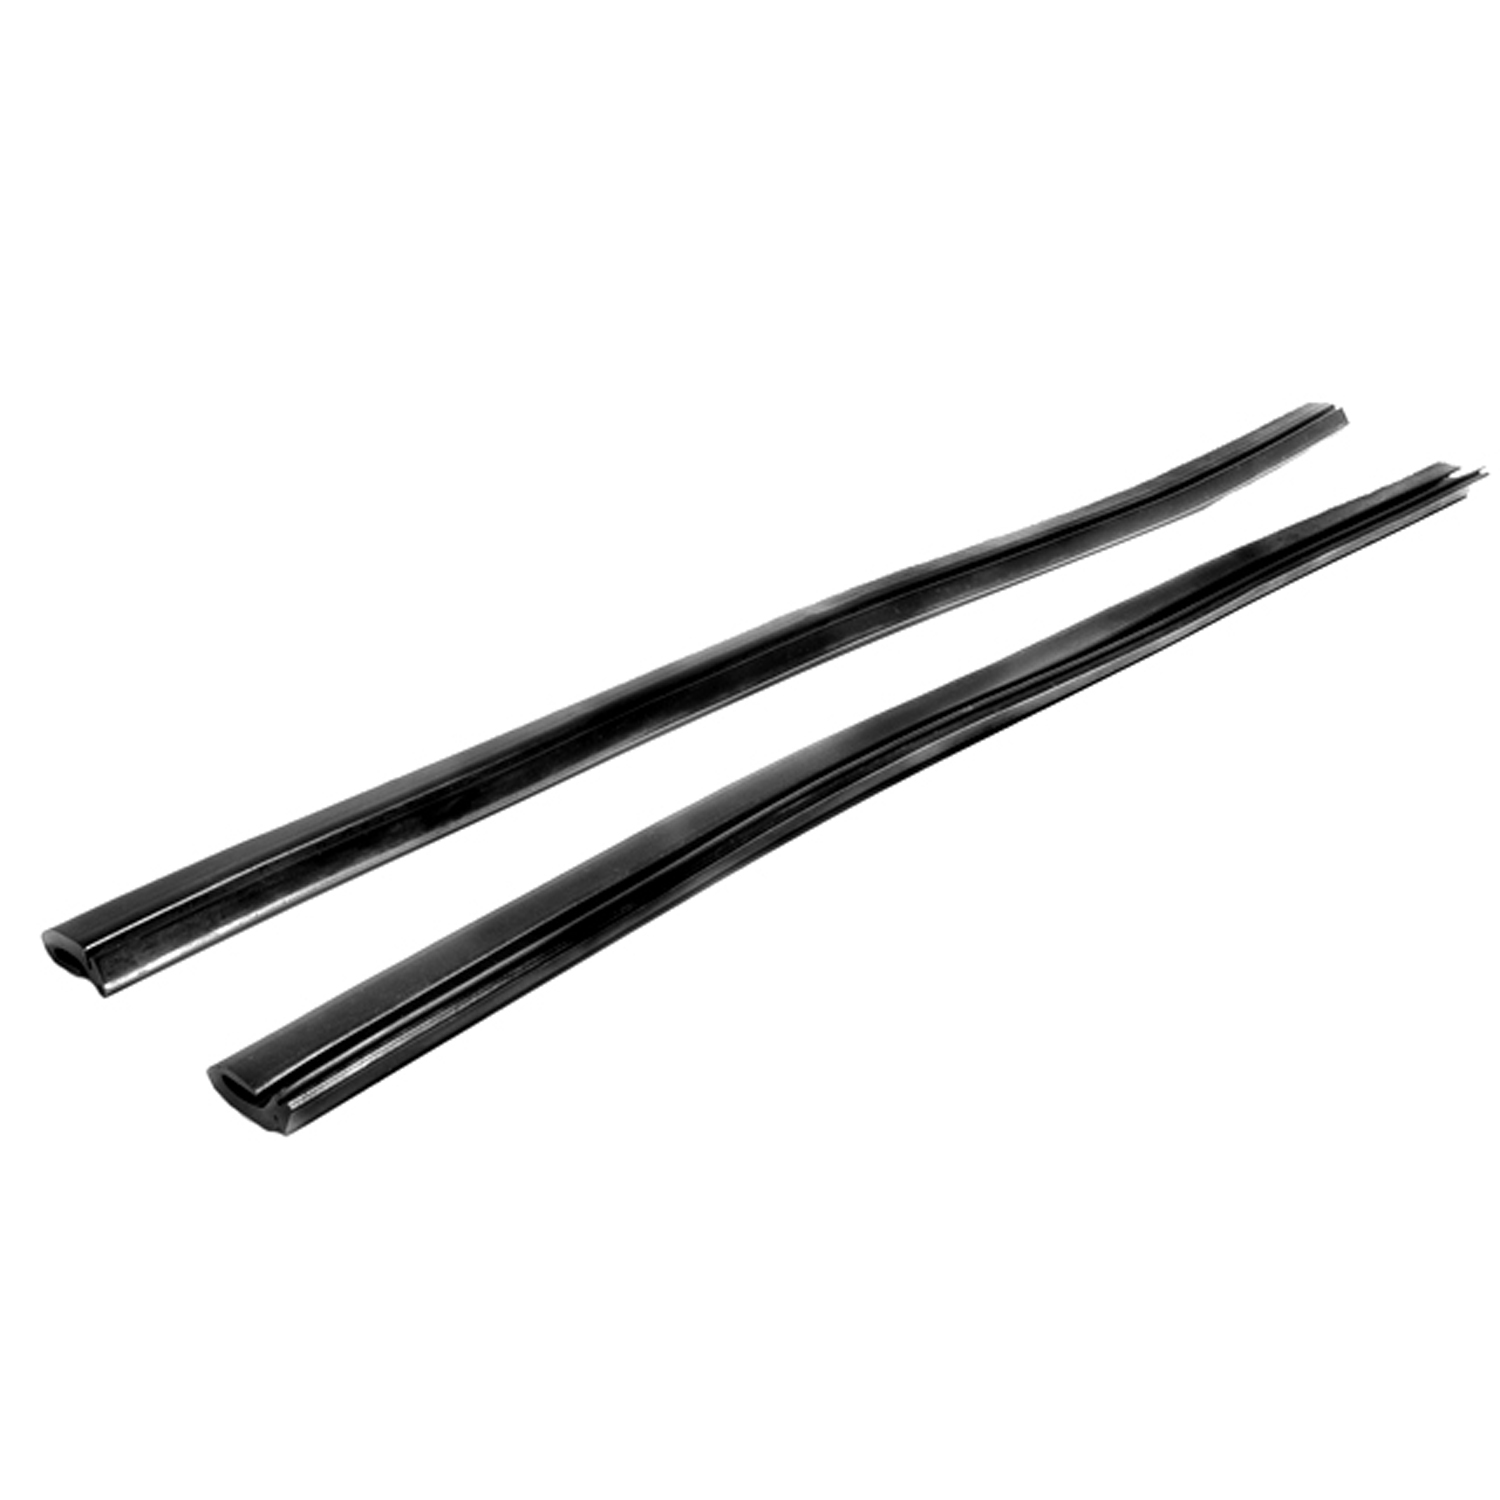 1968 Pontiac Tempest Rear Side Roll-Up Window Seal, for Hardtops and Convertibles-VS 3